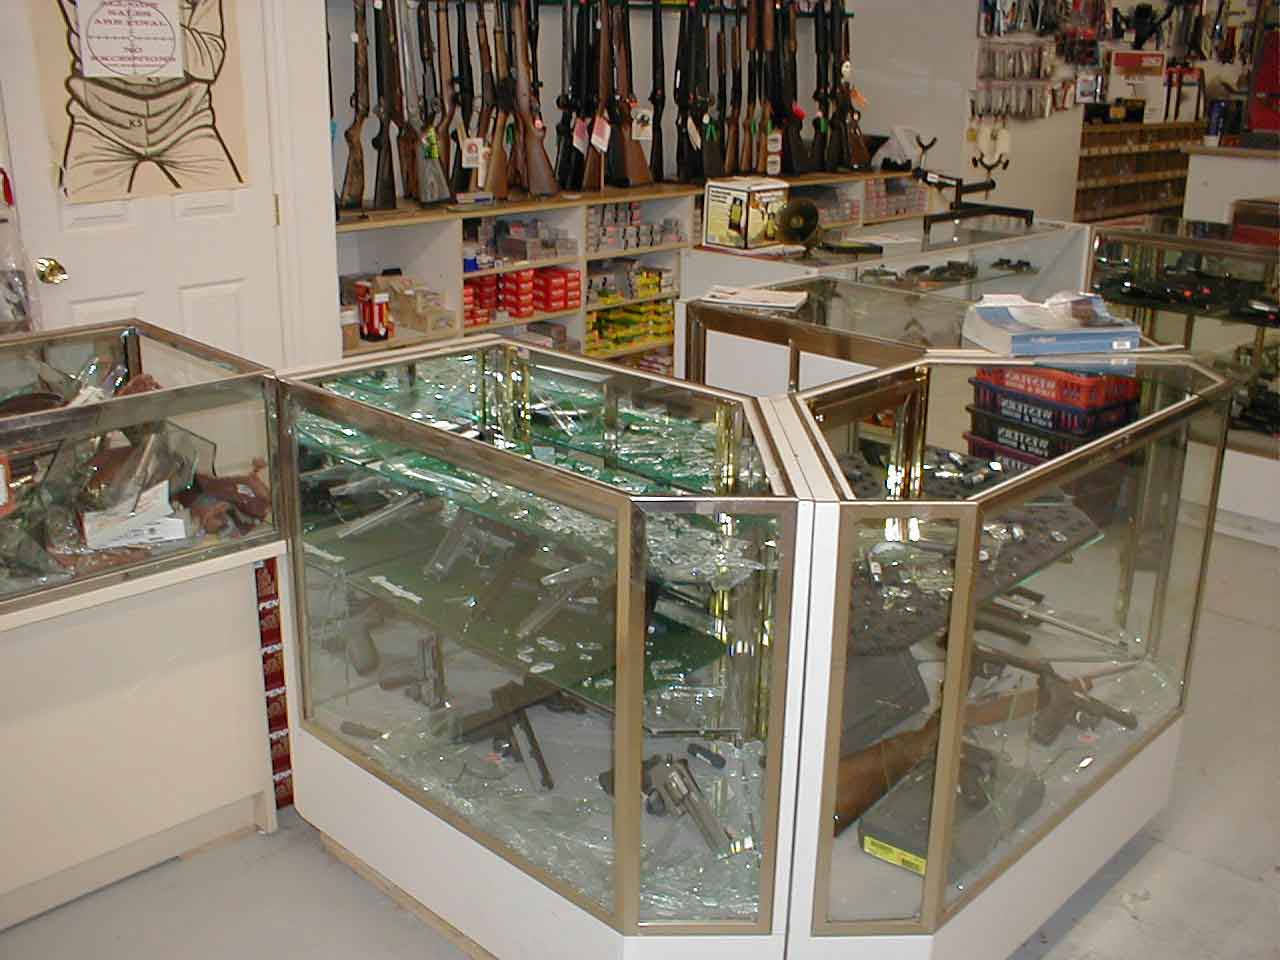 A different gun case that has been broken into. It is next to a register that sits in front of a long row of rifles for sale.